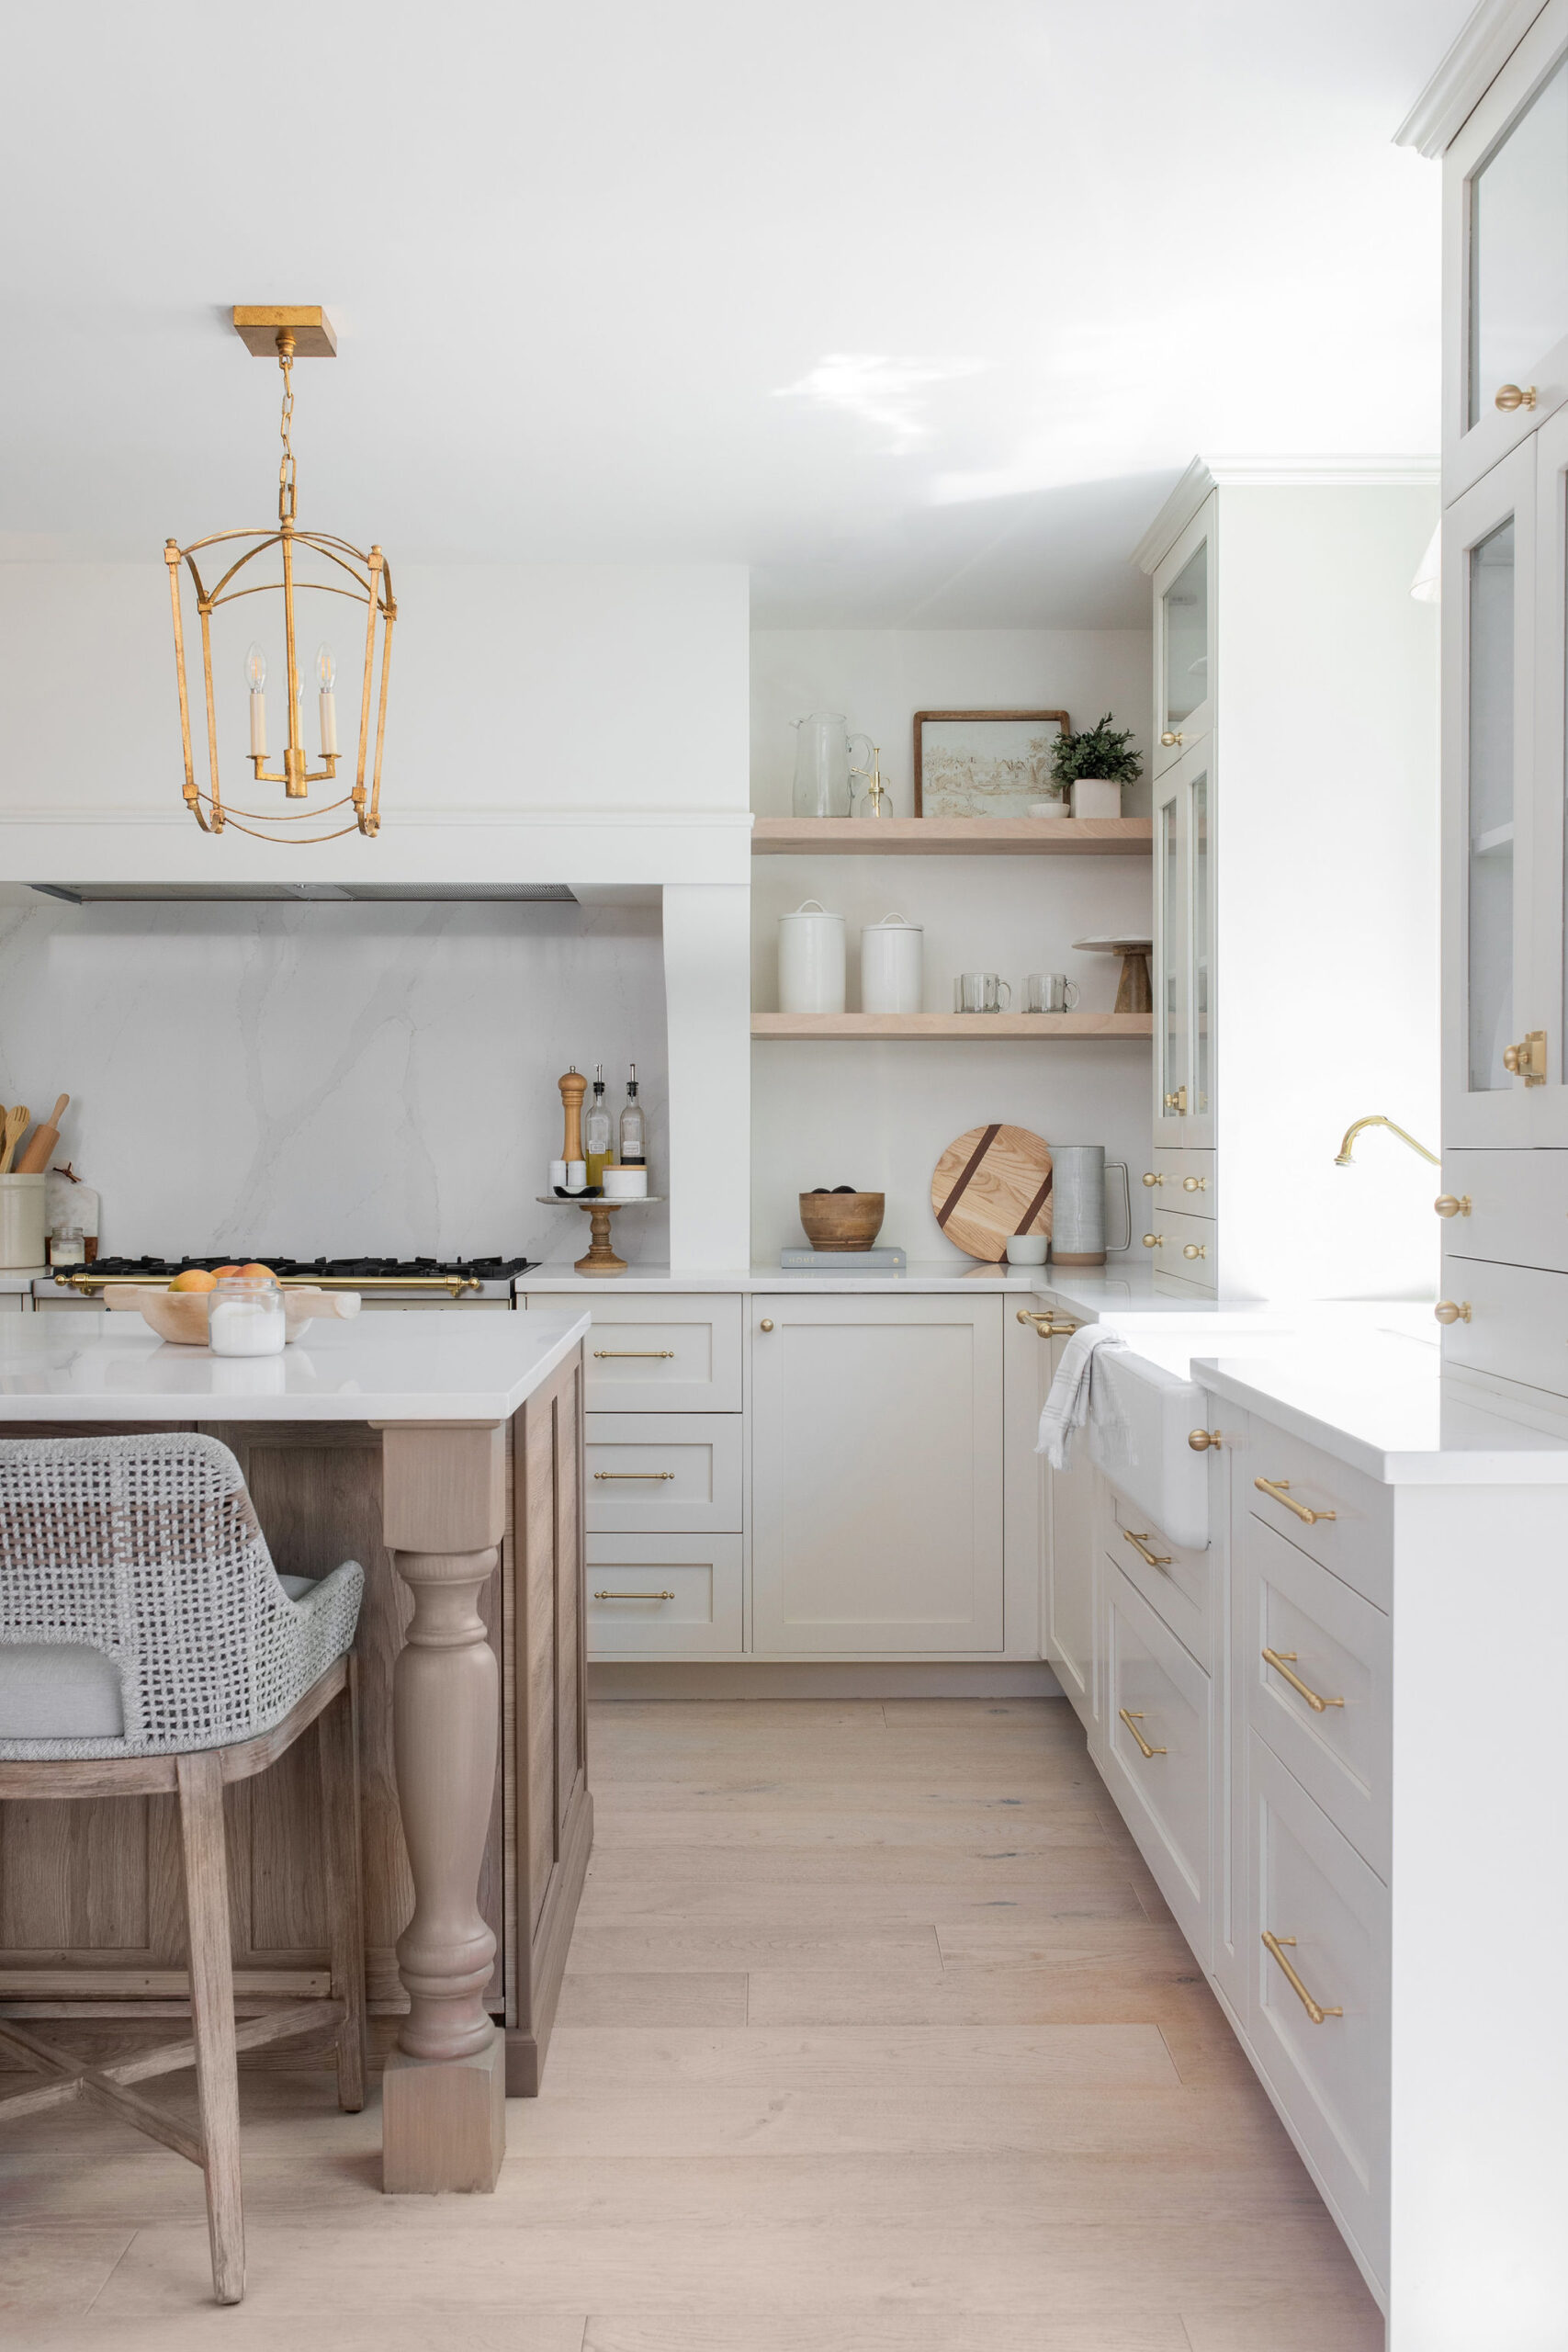 The 5 Best White Paints for Kitchen Cabinets, According to Designers